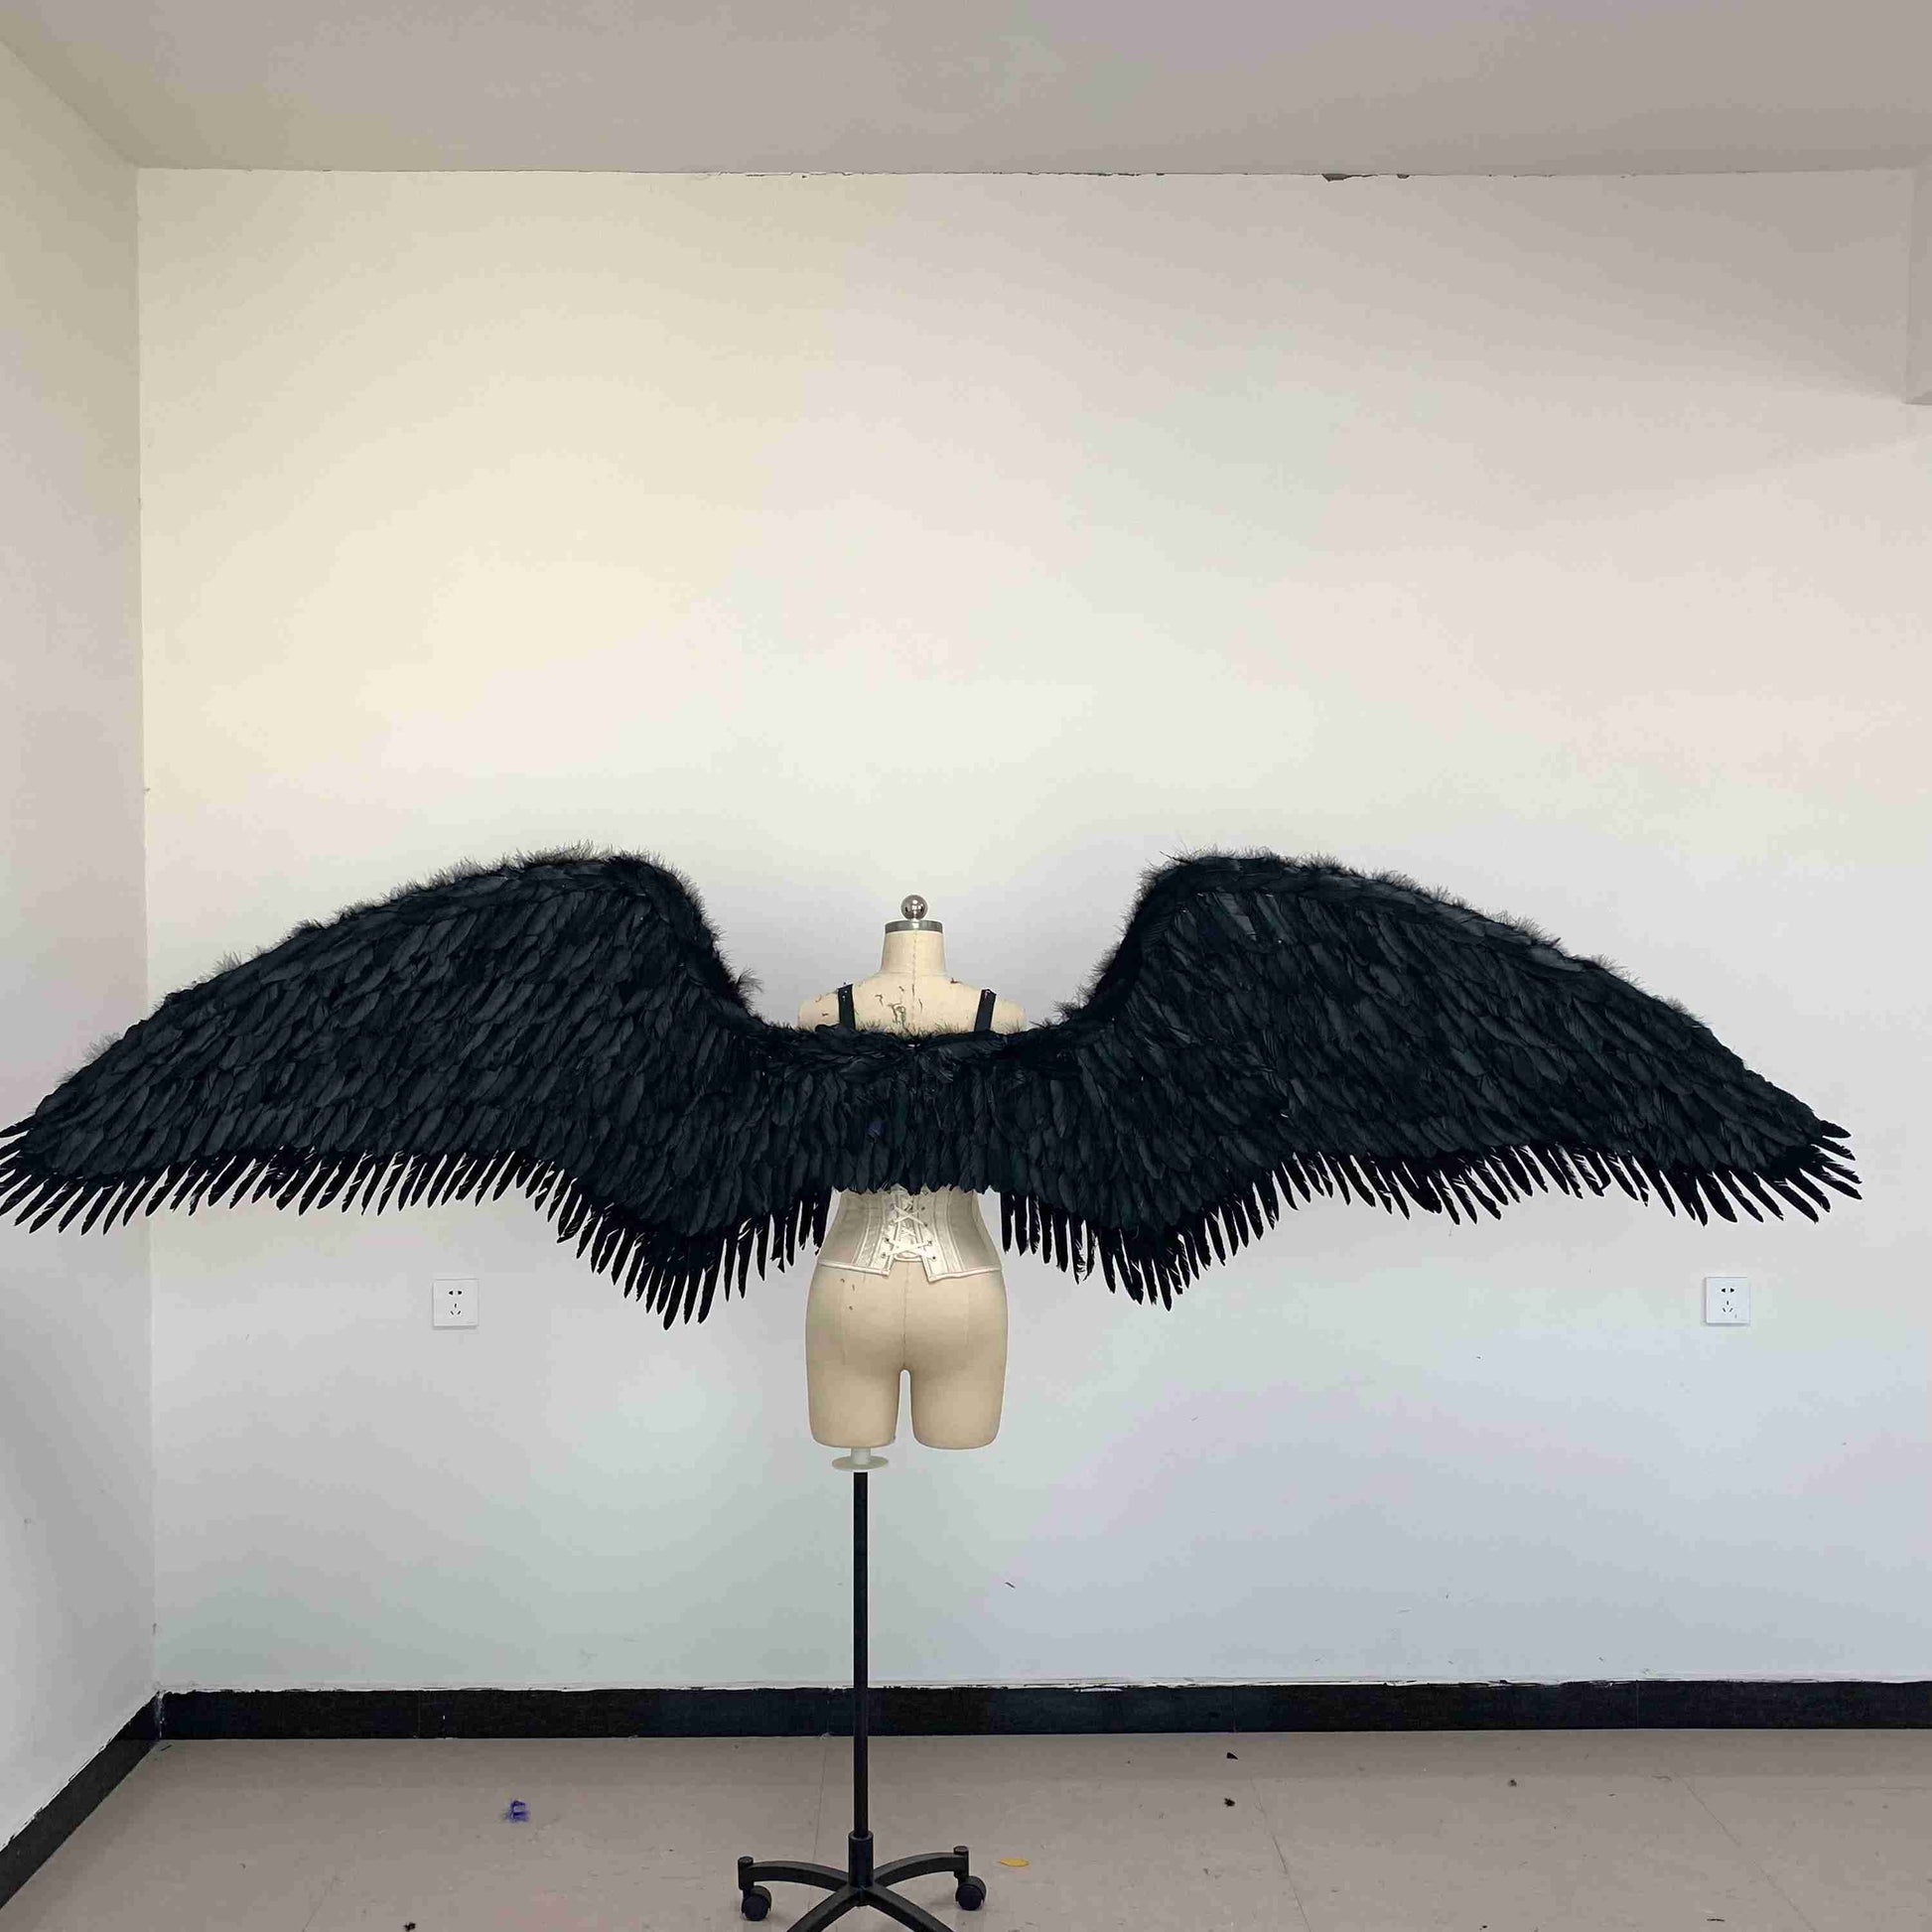 Our black fallen angel wings from the back. Made from goose feathers. Wings for the devil or fallen angel costume. Suitable for photoshoots.